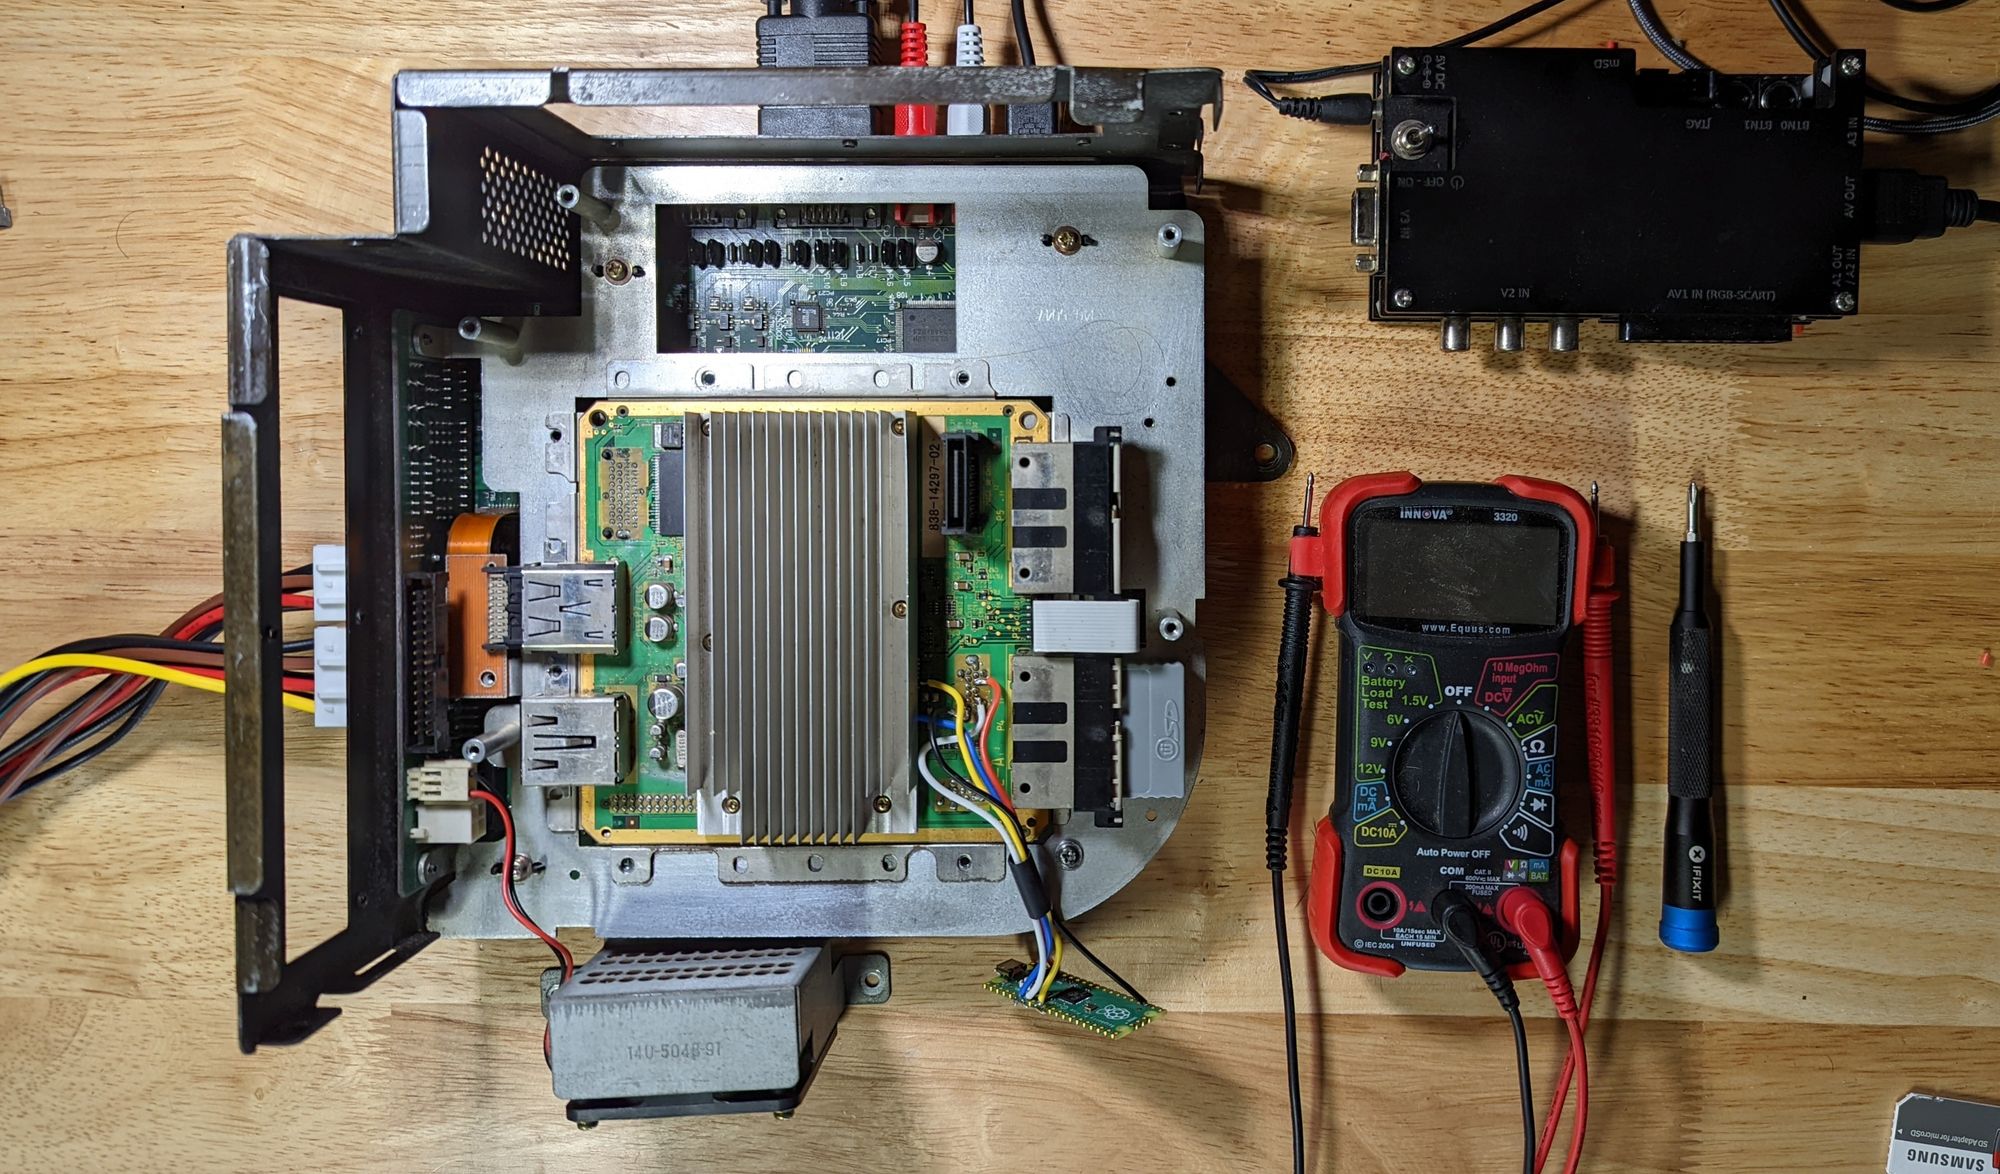 A Triforce arcade unit stripped down to the main board component, showing an installed Picoboot mod.